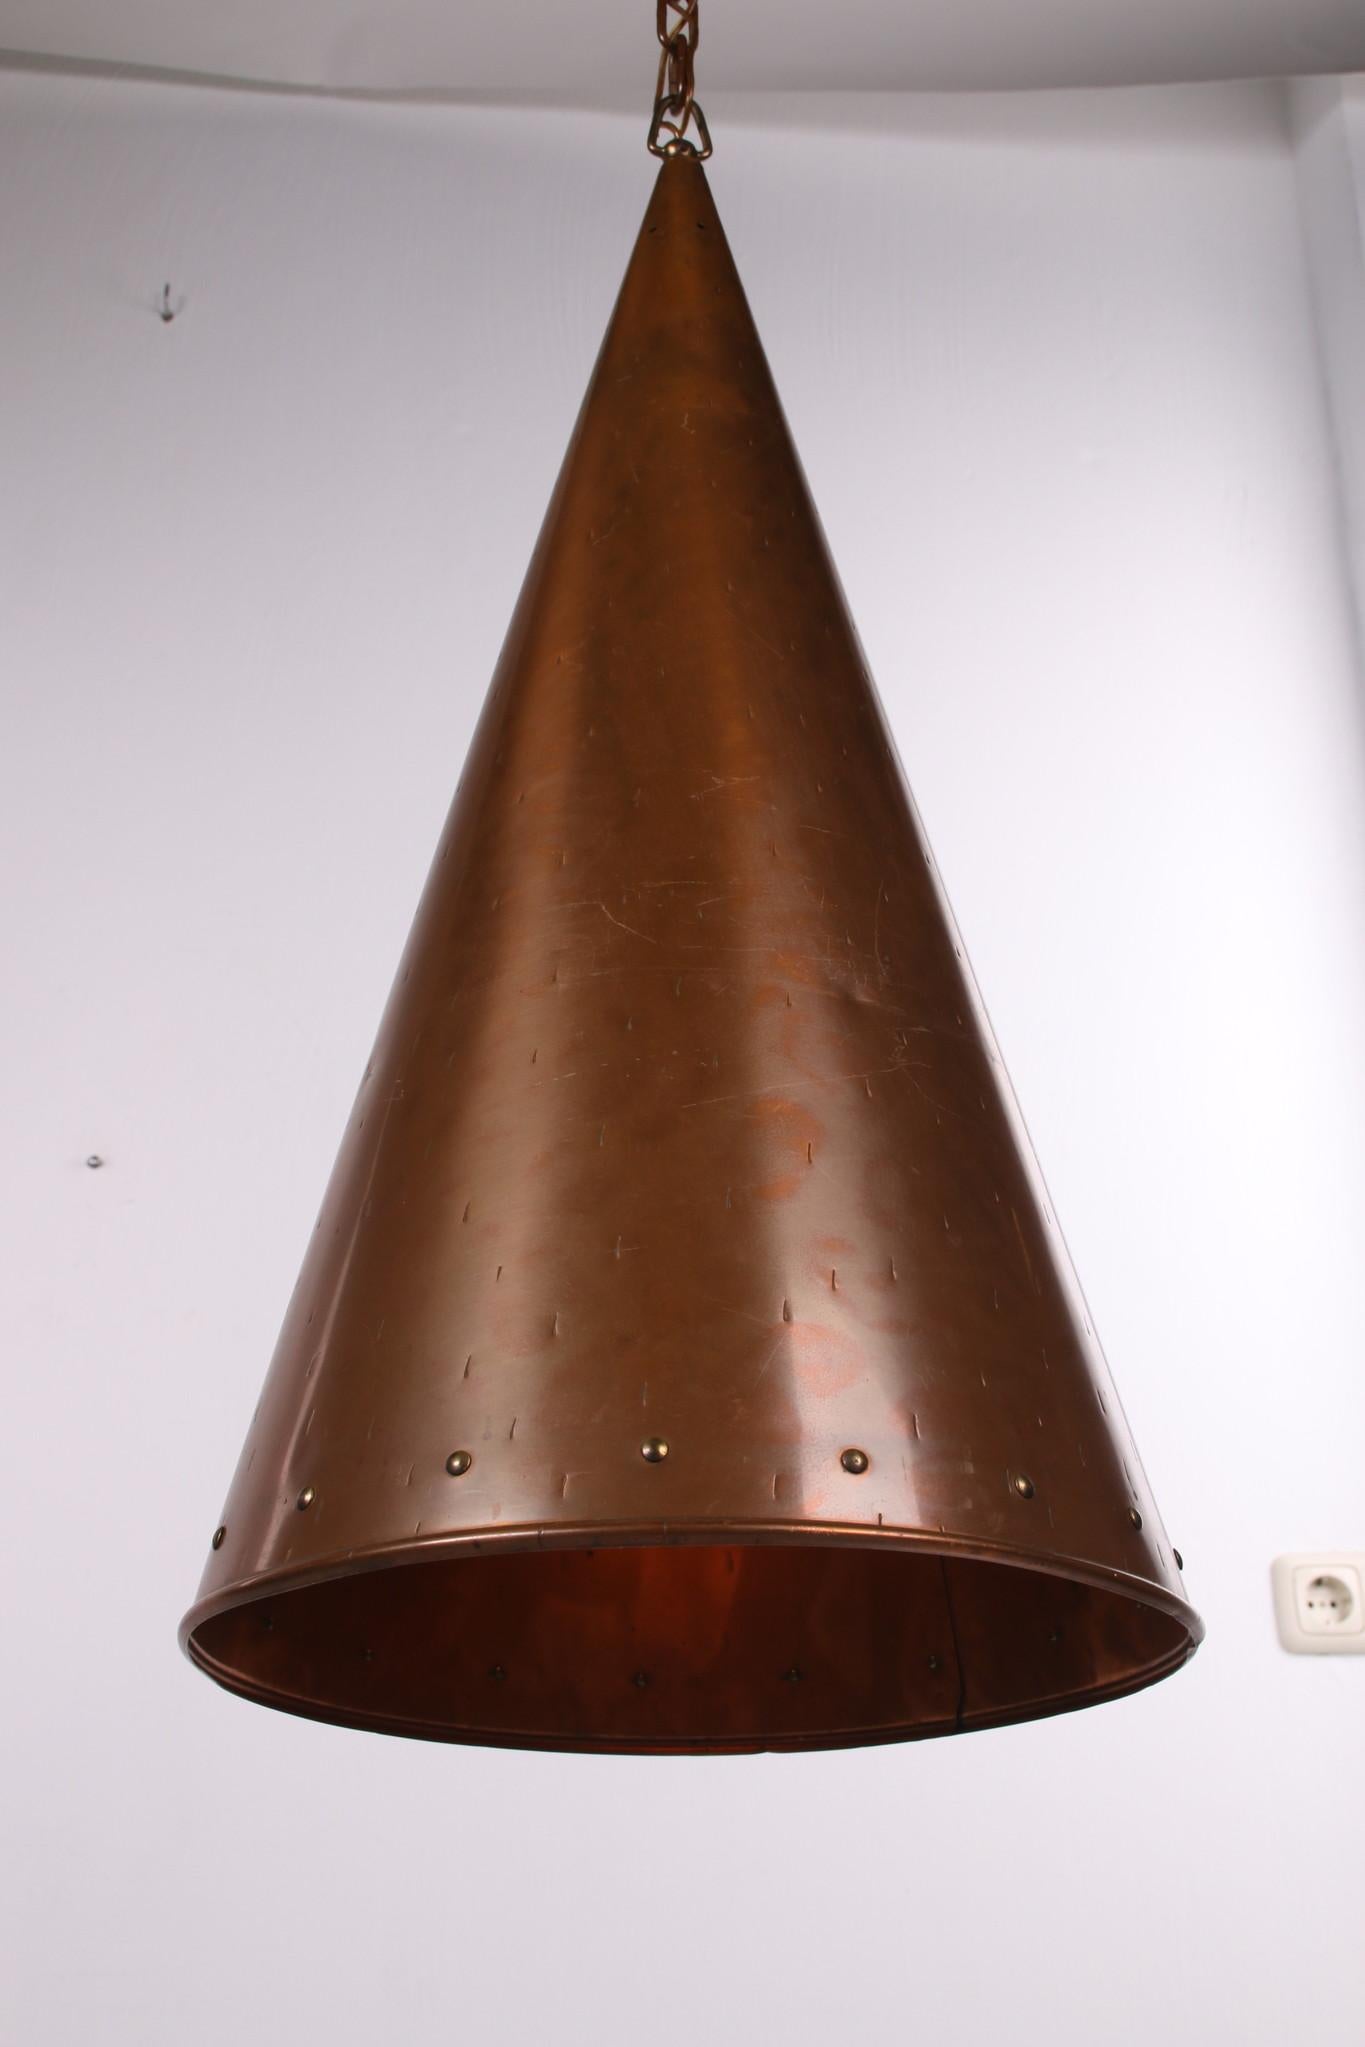 Danish Hand Hammered Copper Pendant Lamp from E.S Horn Aalestrup, 50s For Sale 4